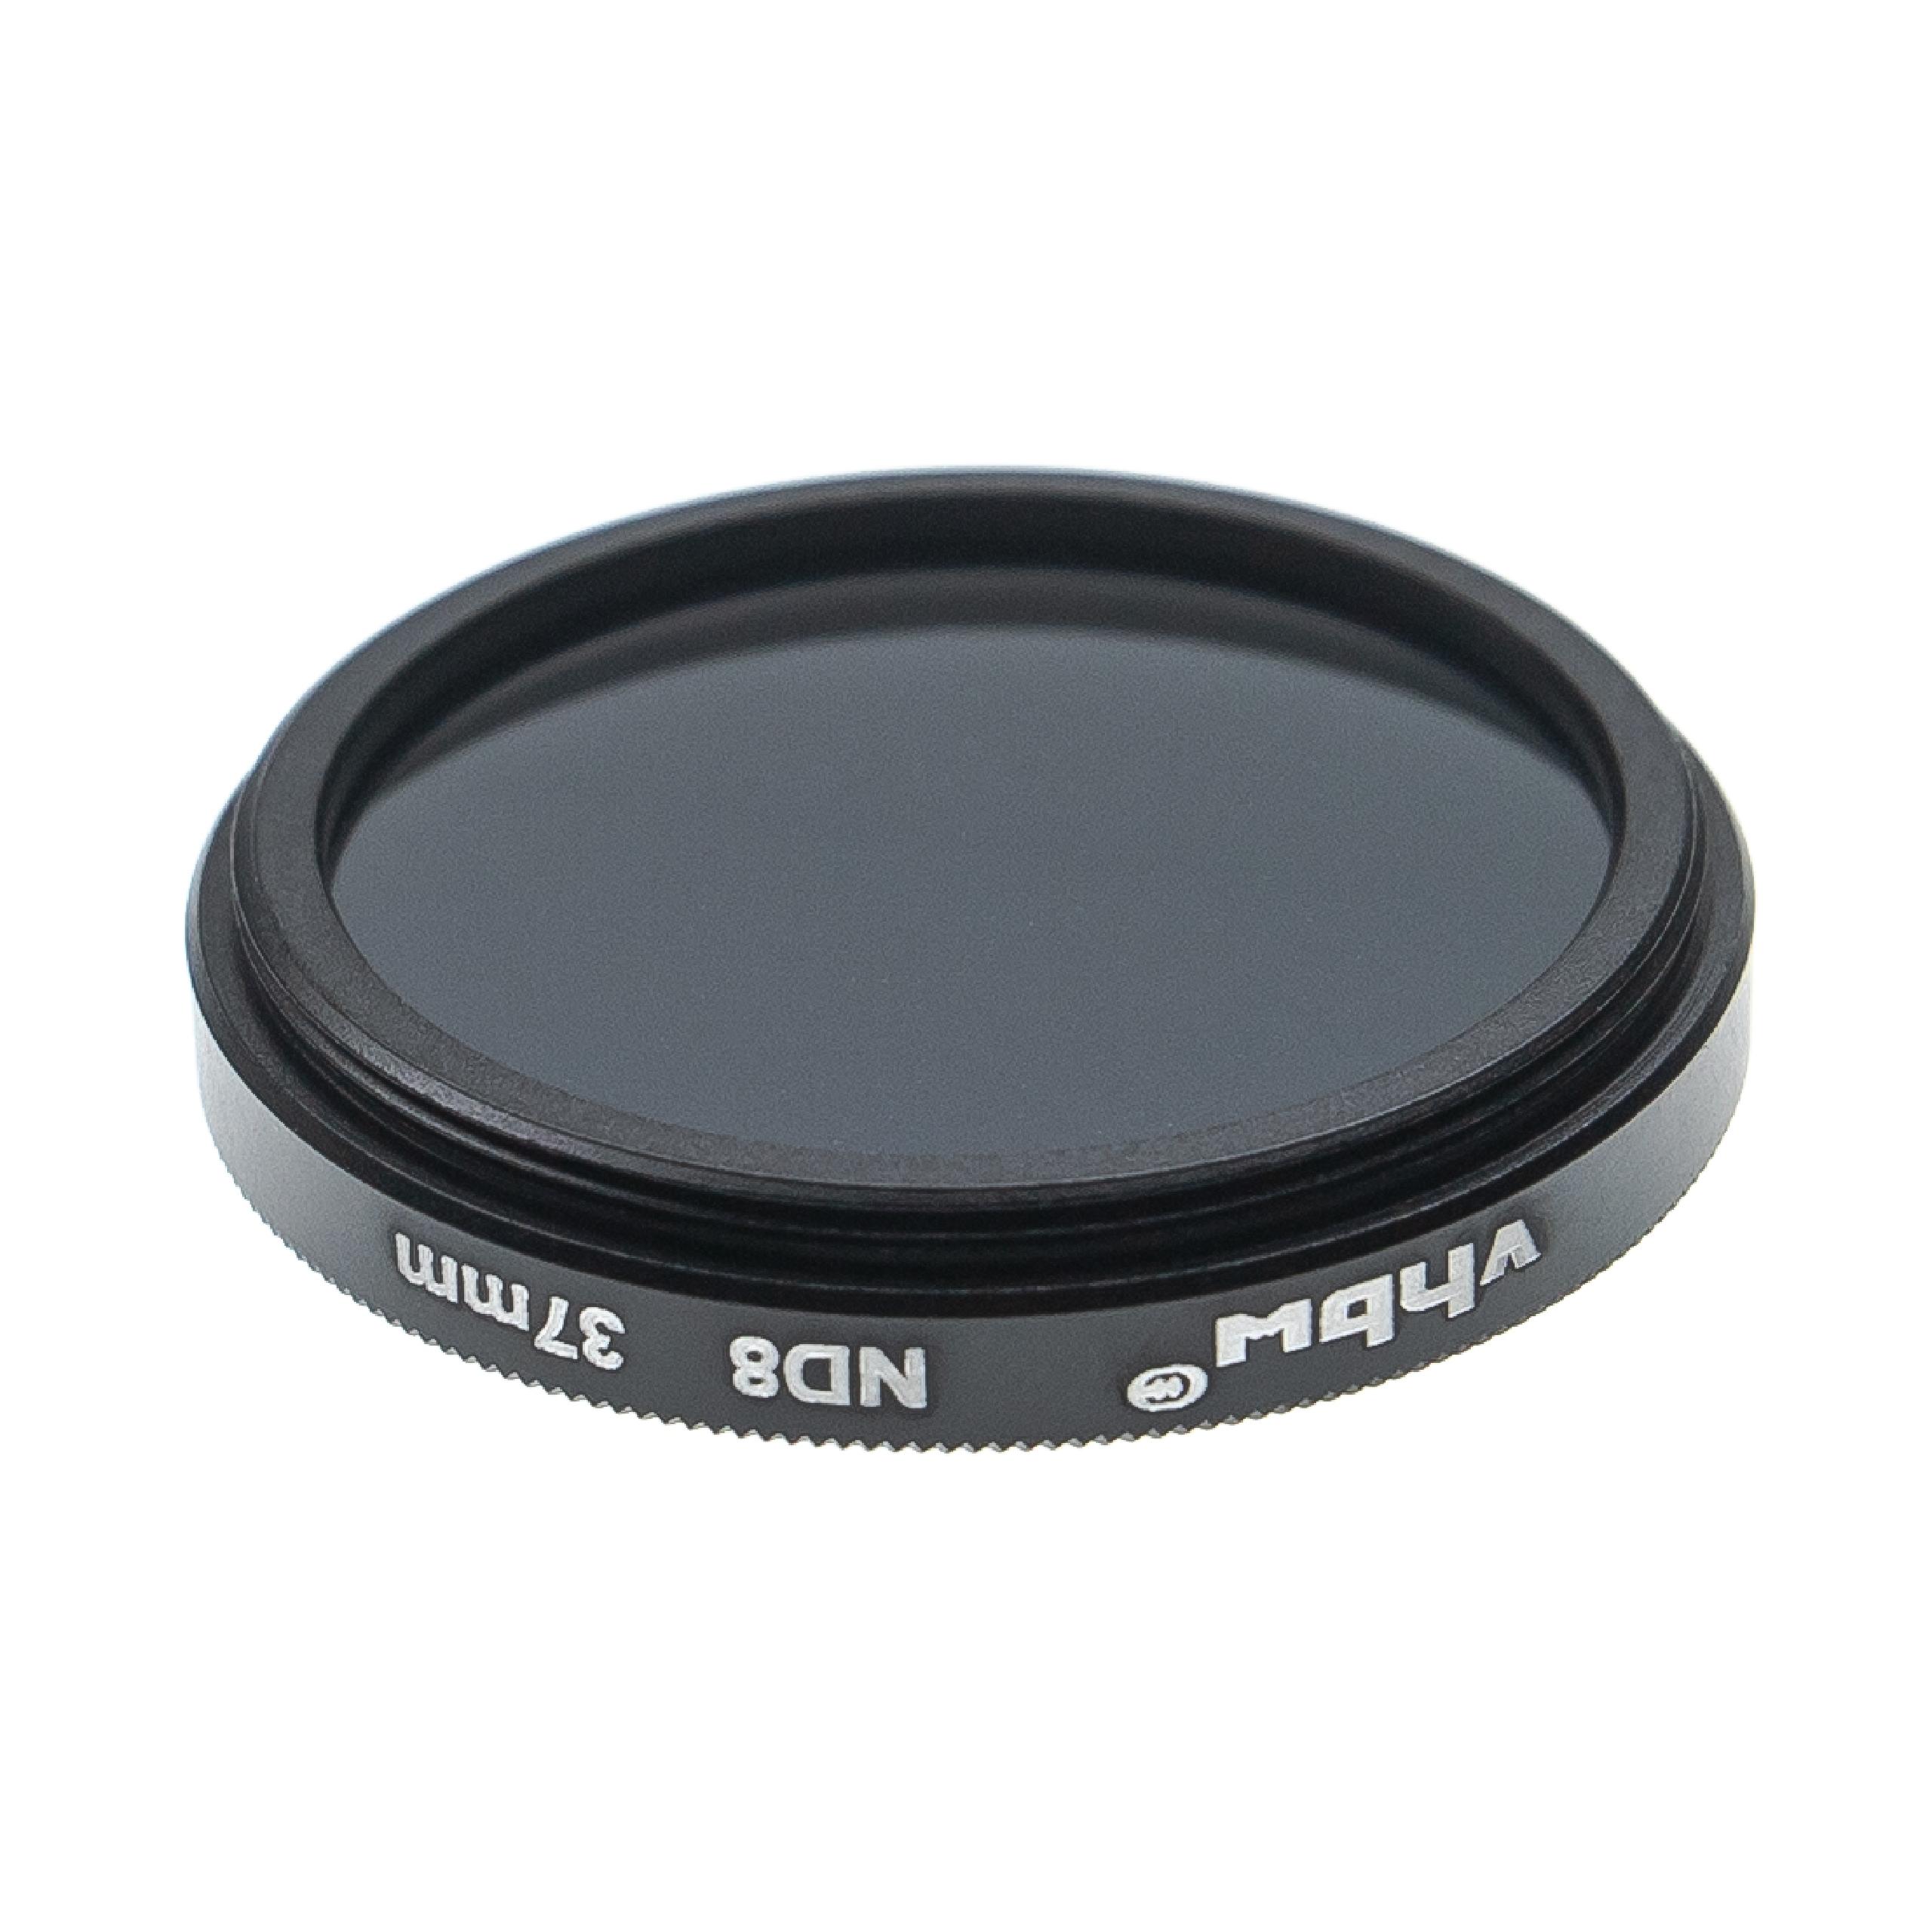 Universal ND Filter ND 8 suitable for Camera Lenses with 37 mm Filter Thread - Grey Filter